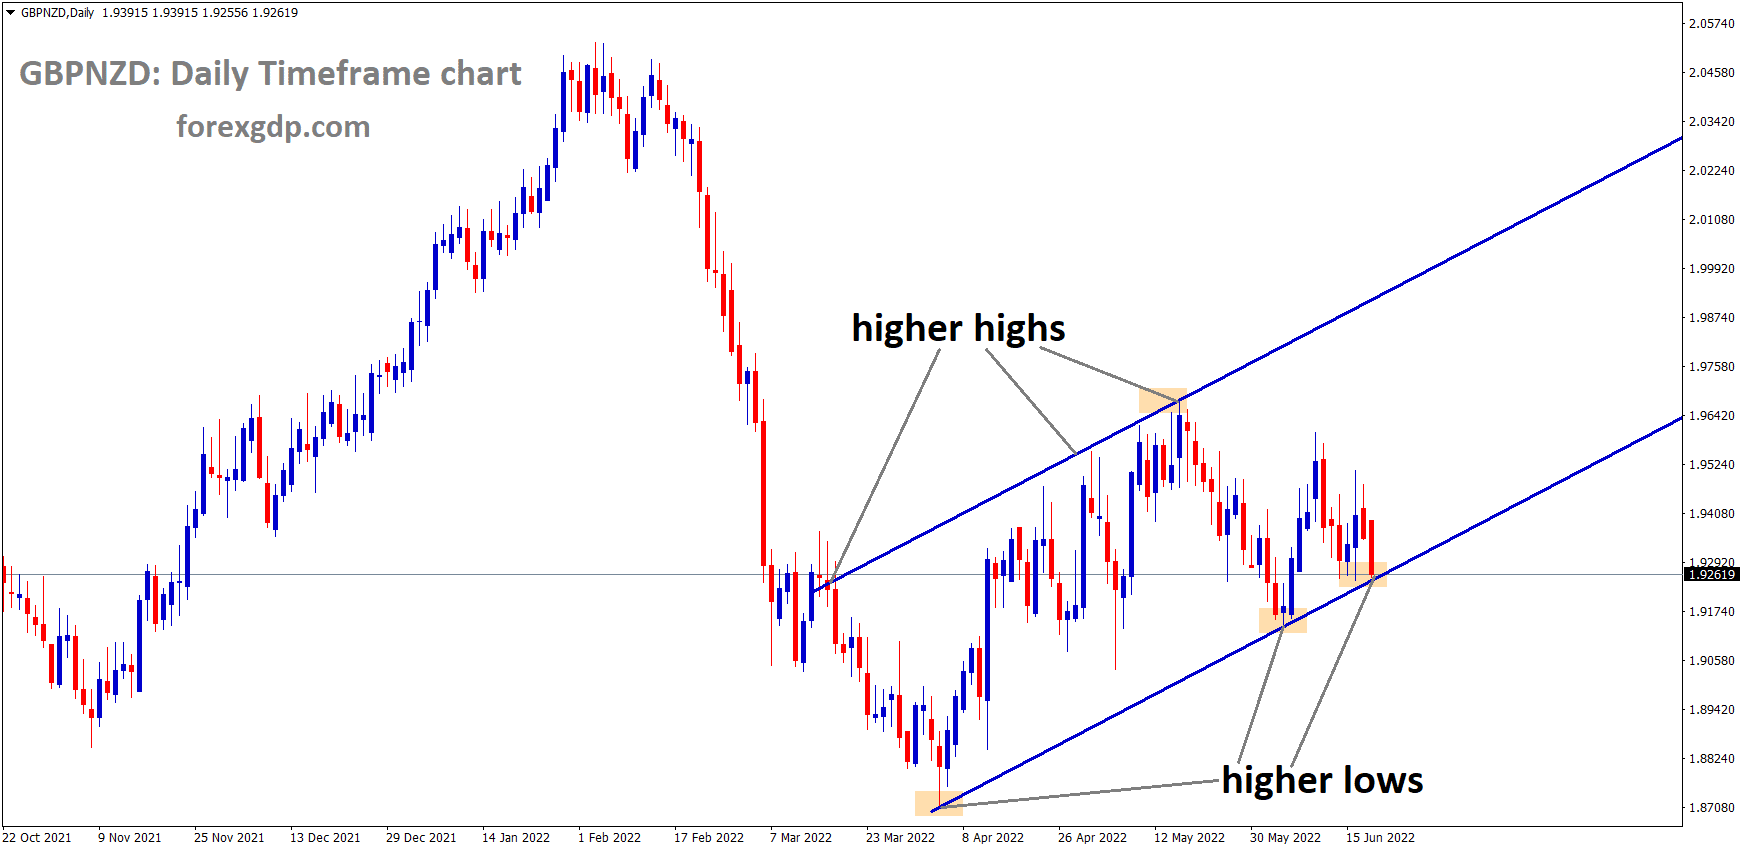 GBPNZD is moving in an Ascending channel and the Market has reached the higher low area of the channel